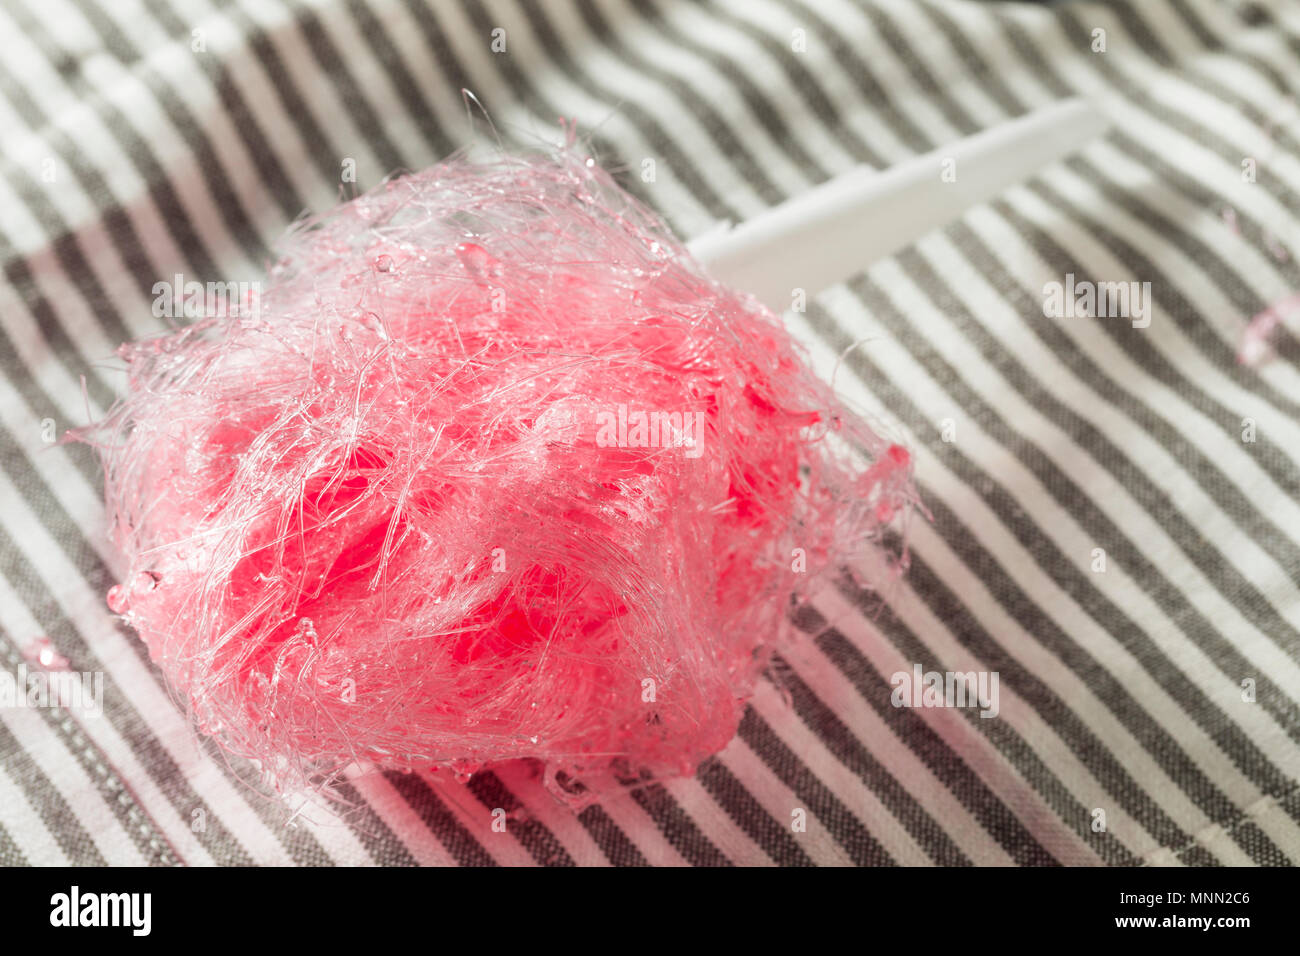 Sugary Pink Homemade Cotton Candy Floss On A Stick Stock Photo Alamy